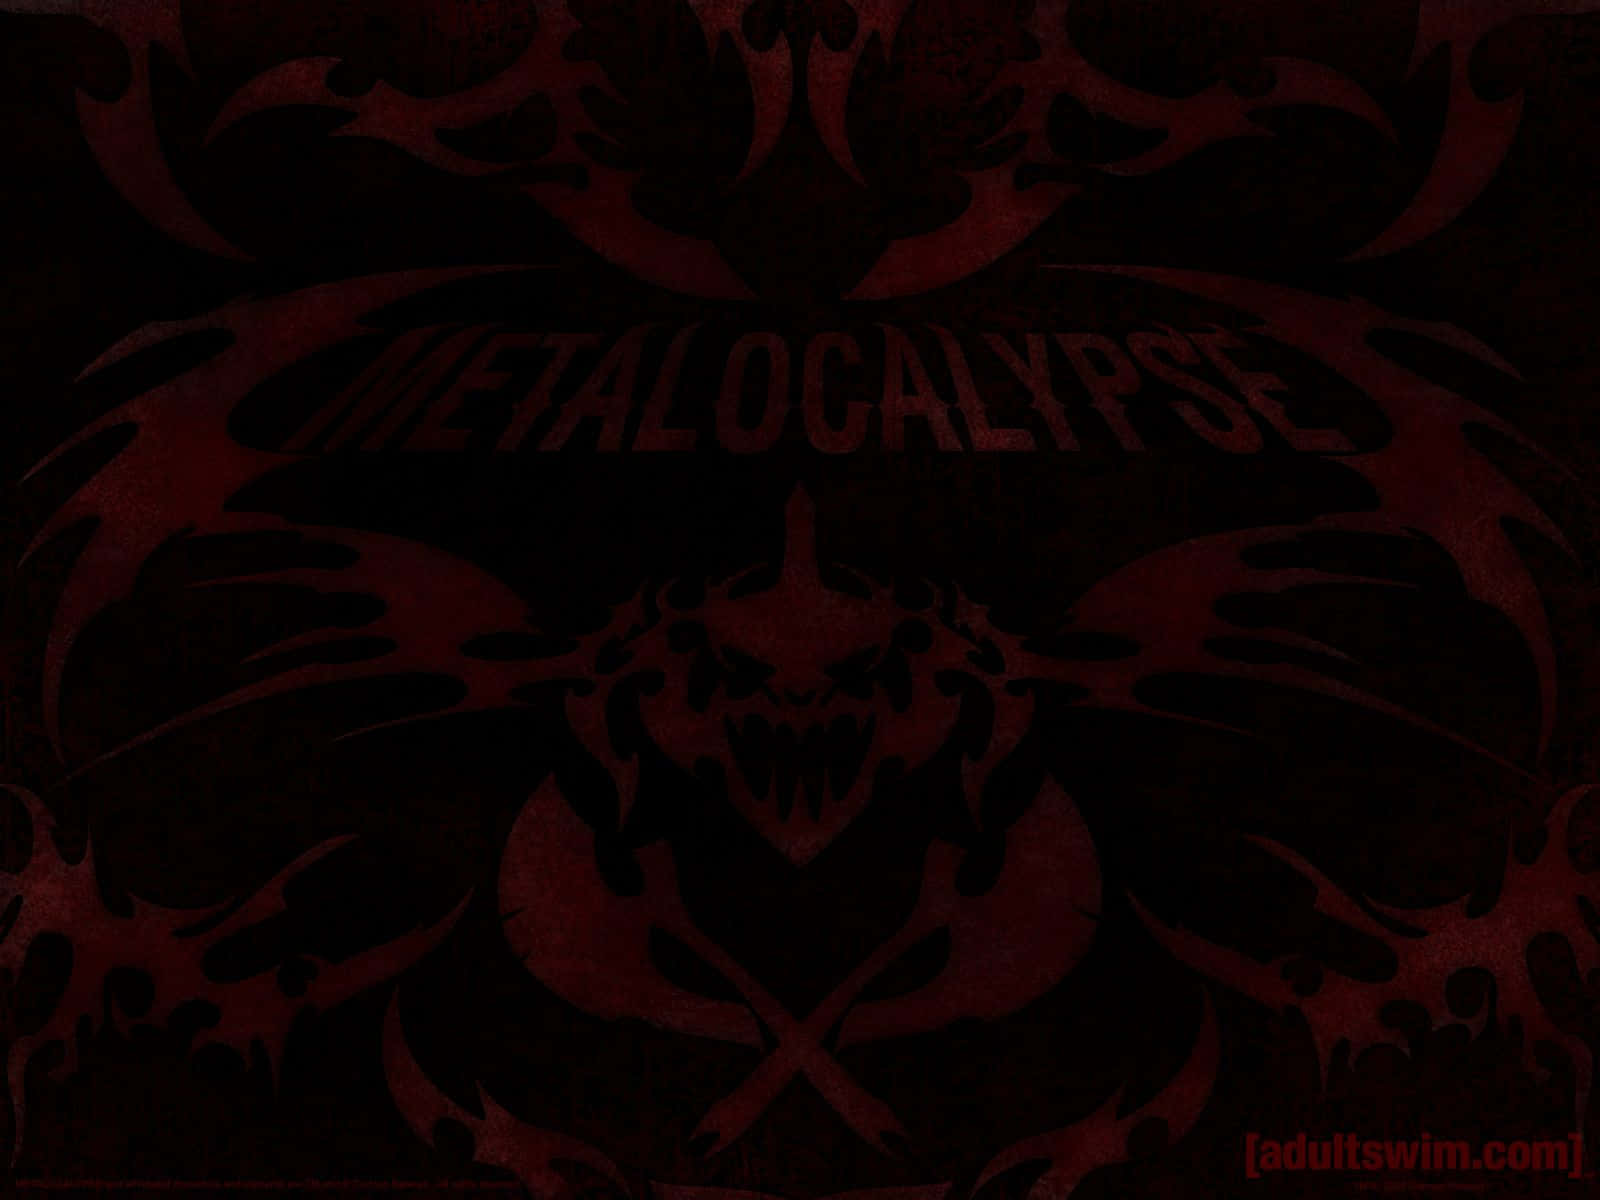 Adultswim Metalocalypse Can Be Translated Into Spanish As 